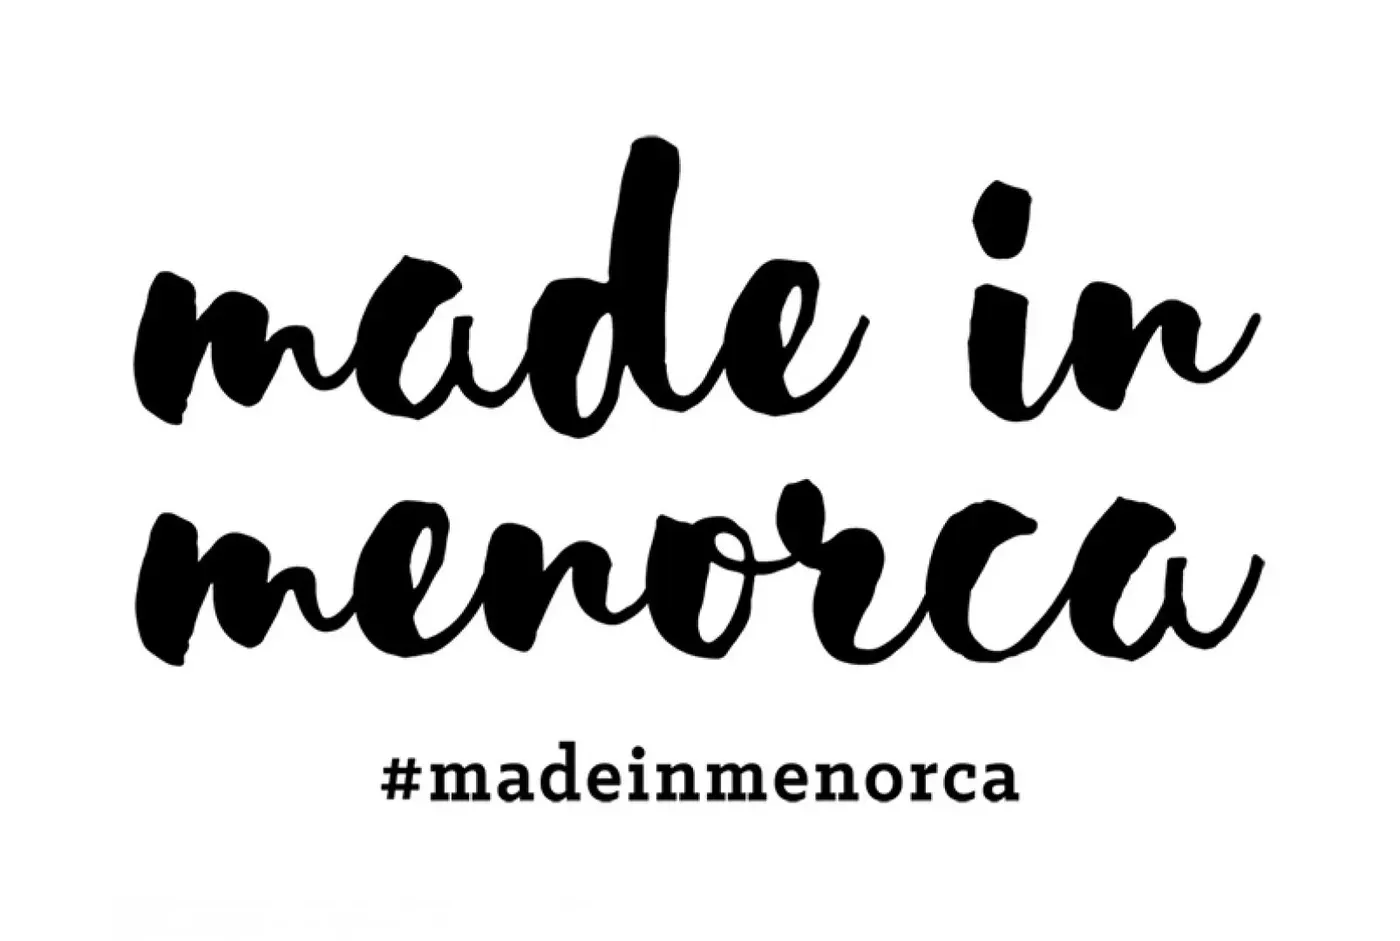 Image of Made in Menorca